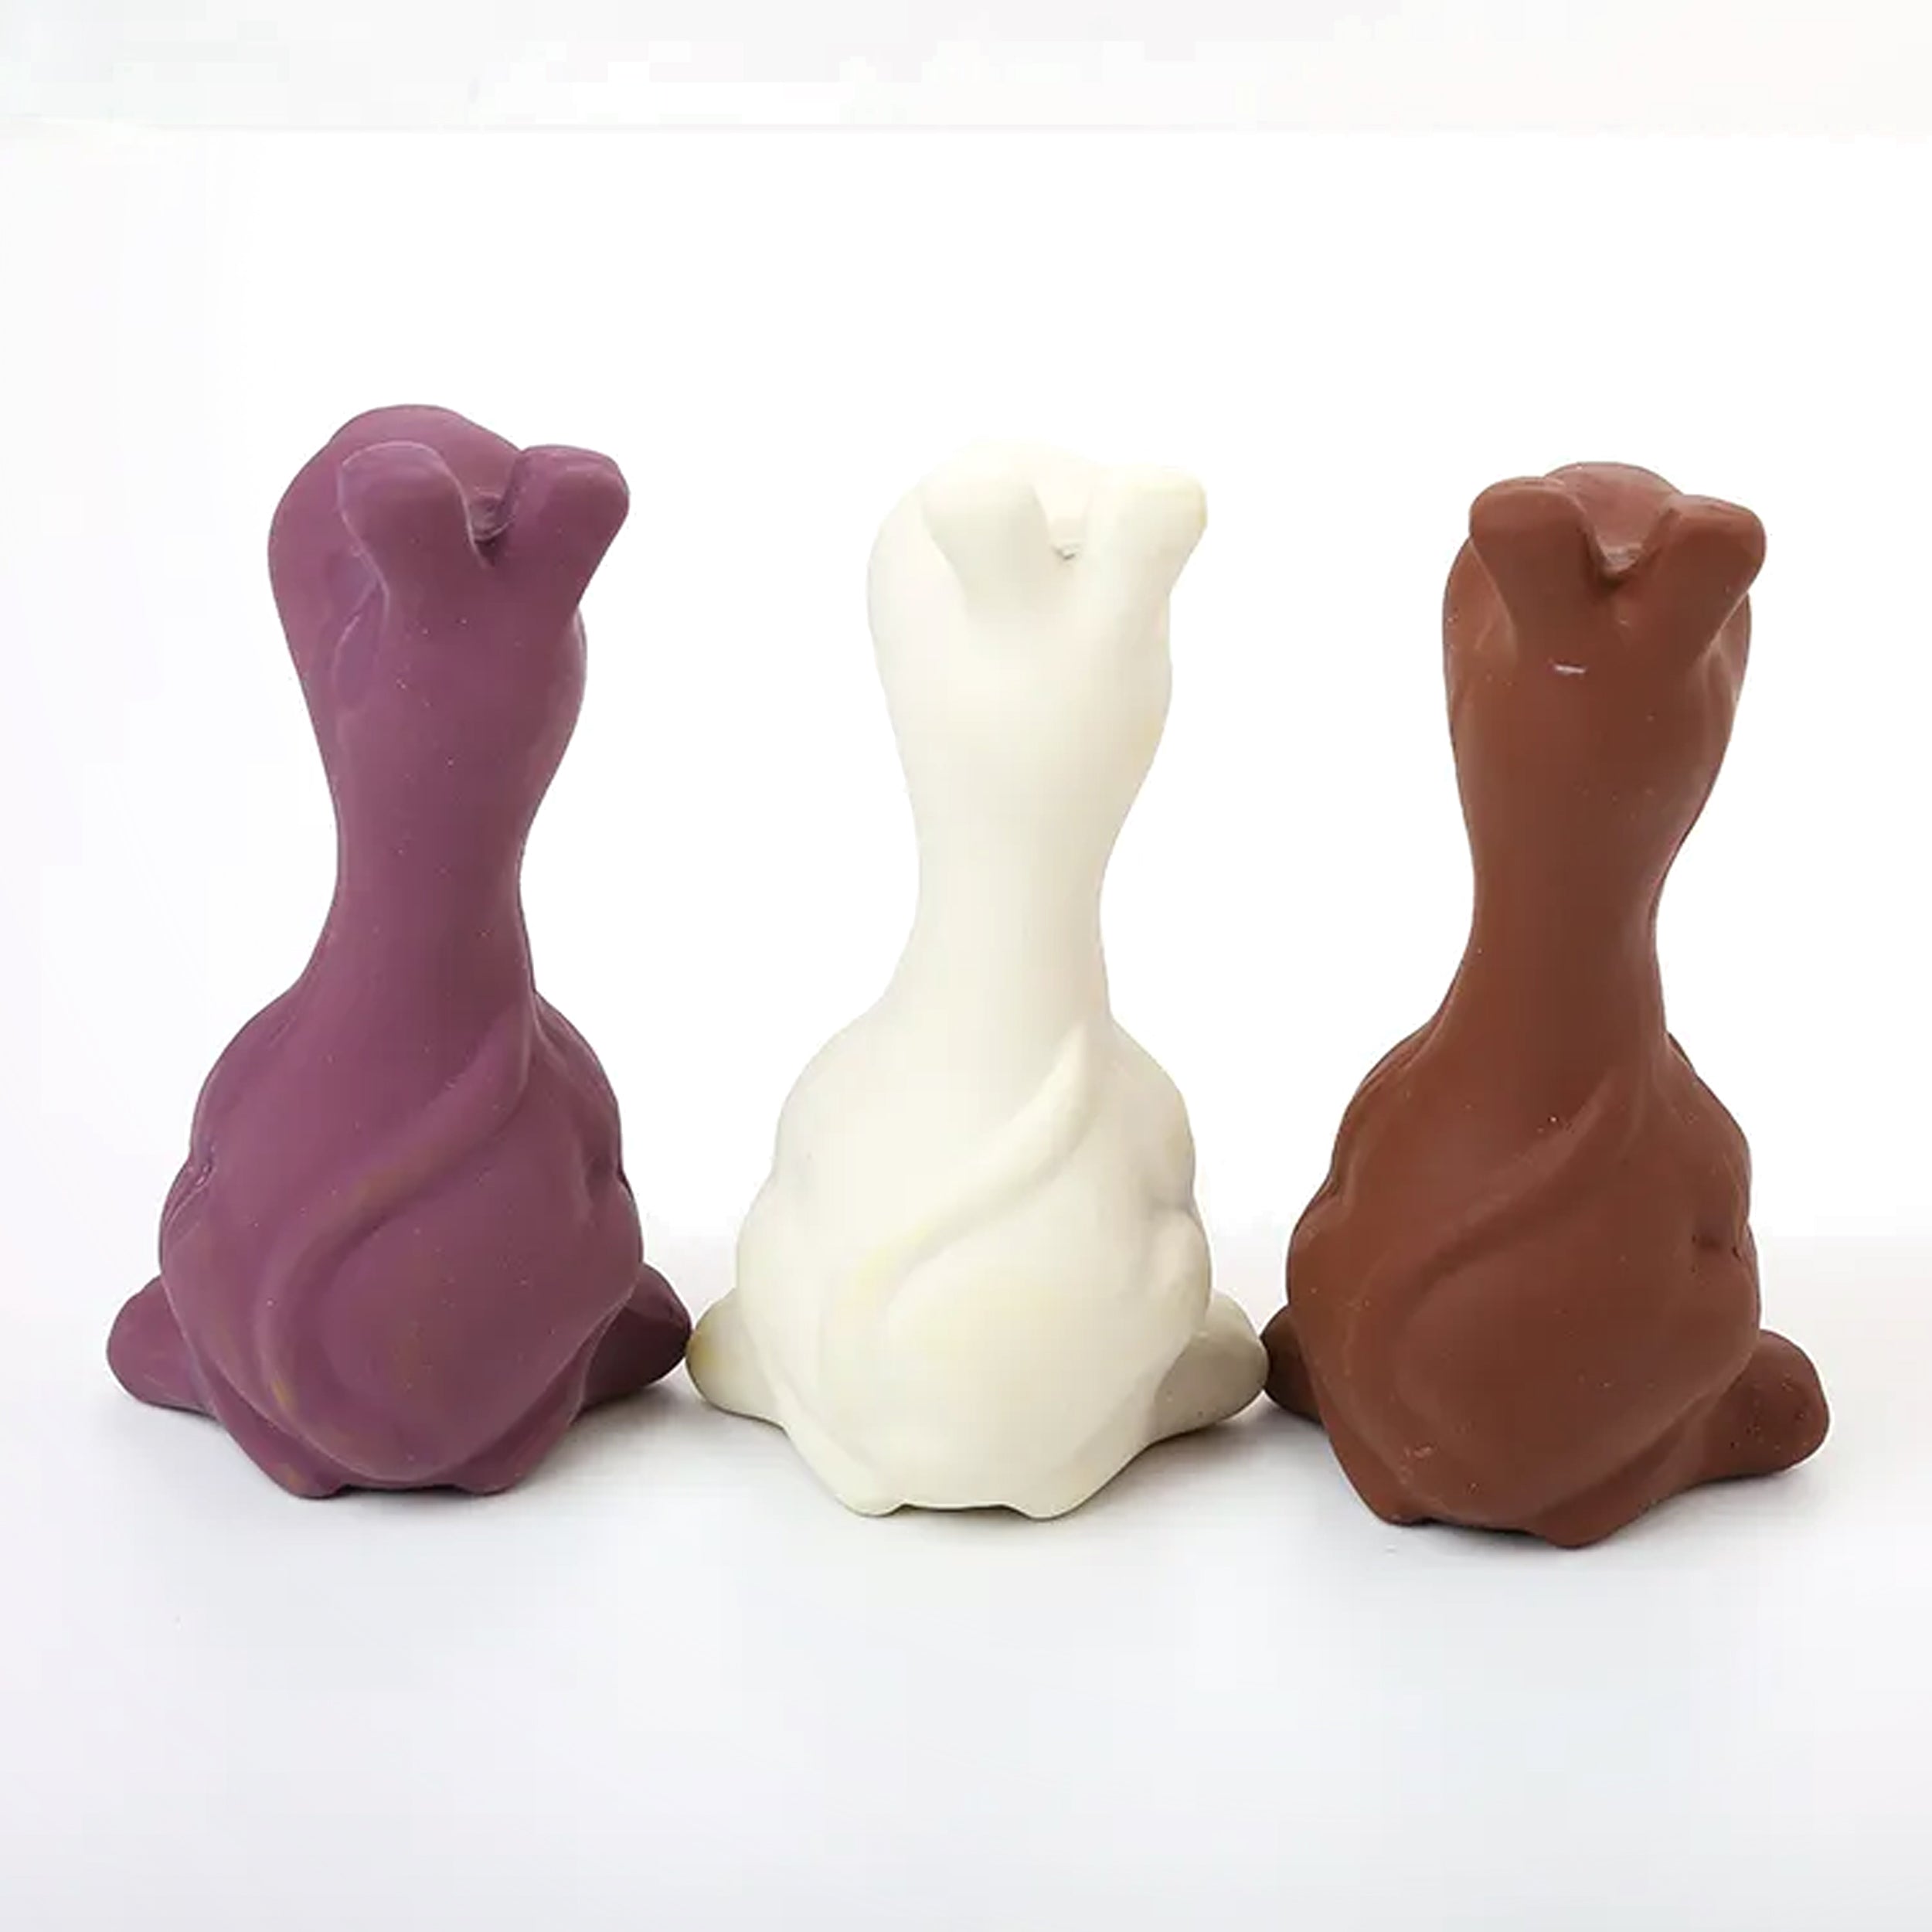 Kangaroo-Shaped Latex Dog Toys | Fun and Durable Chew Toy for Your Pet